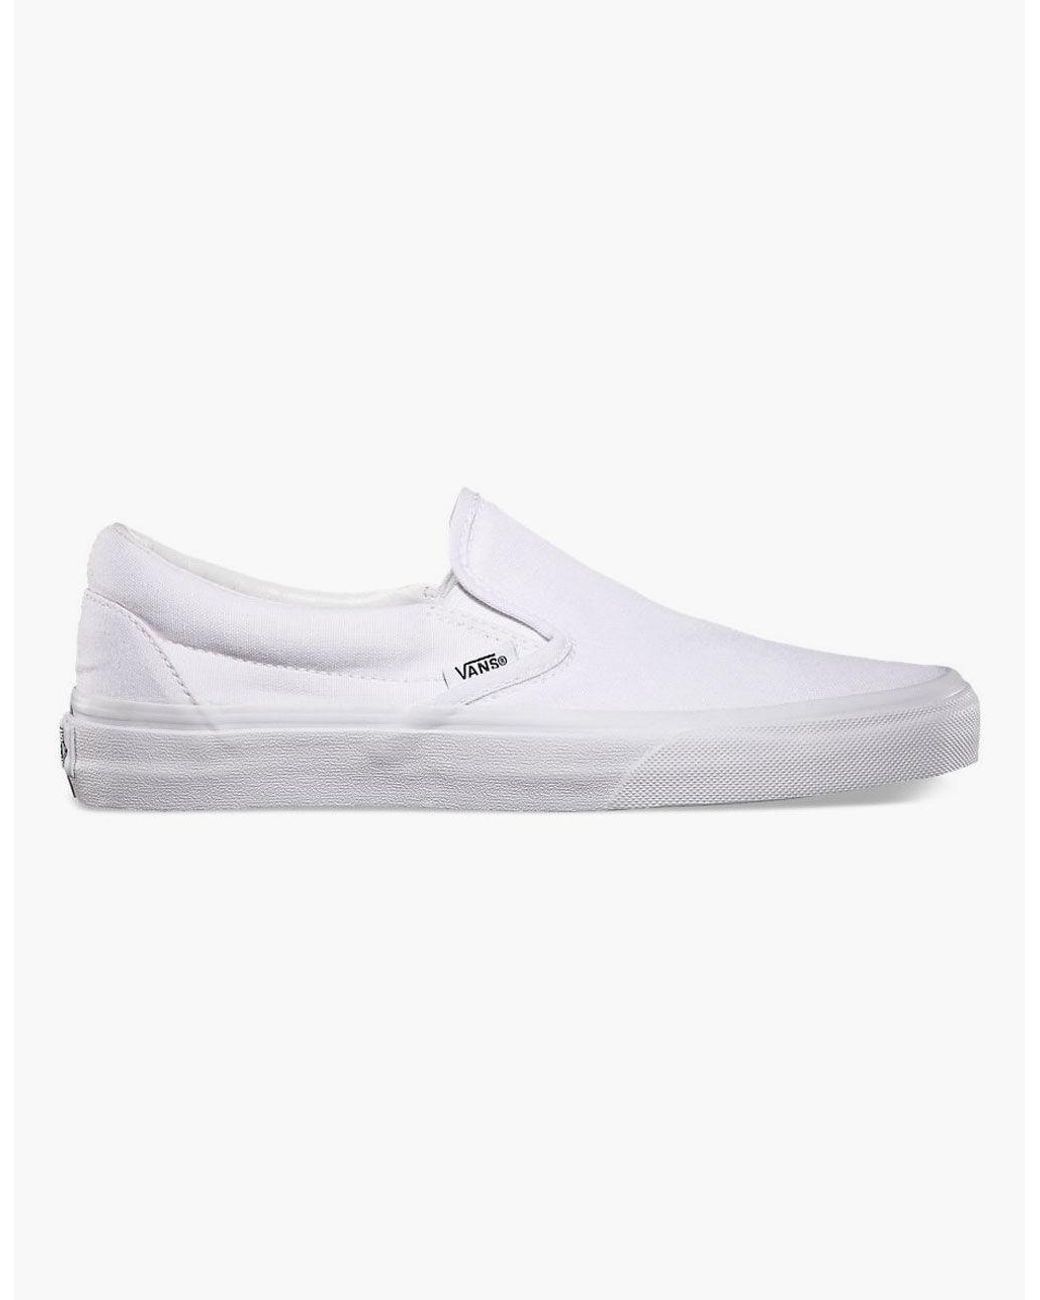 Vans Canvas Classic Slip-on Shoes - Size 4.5 in White for Men - Save 51 ...